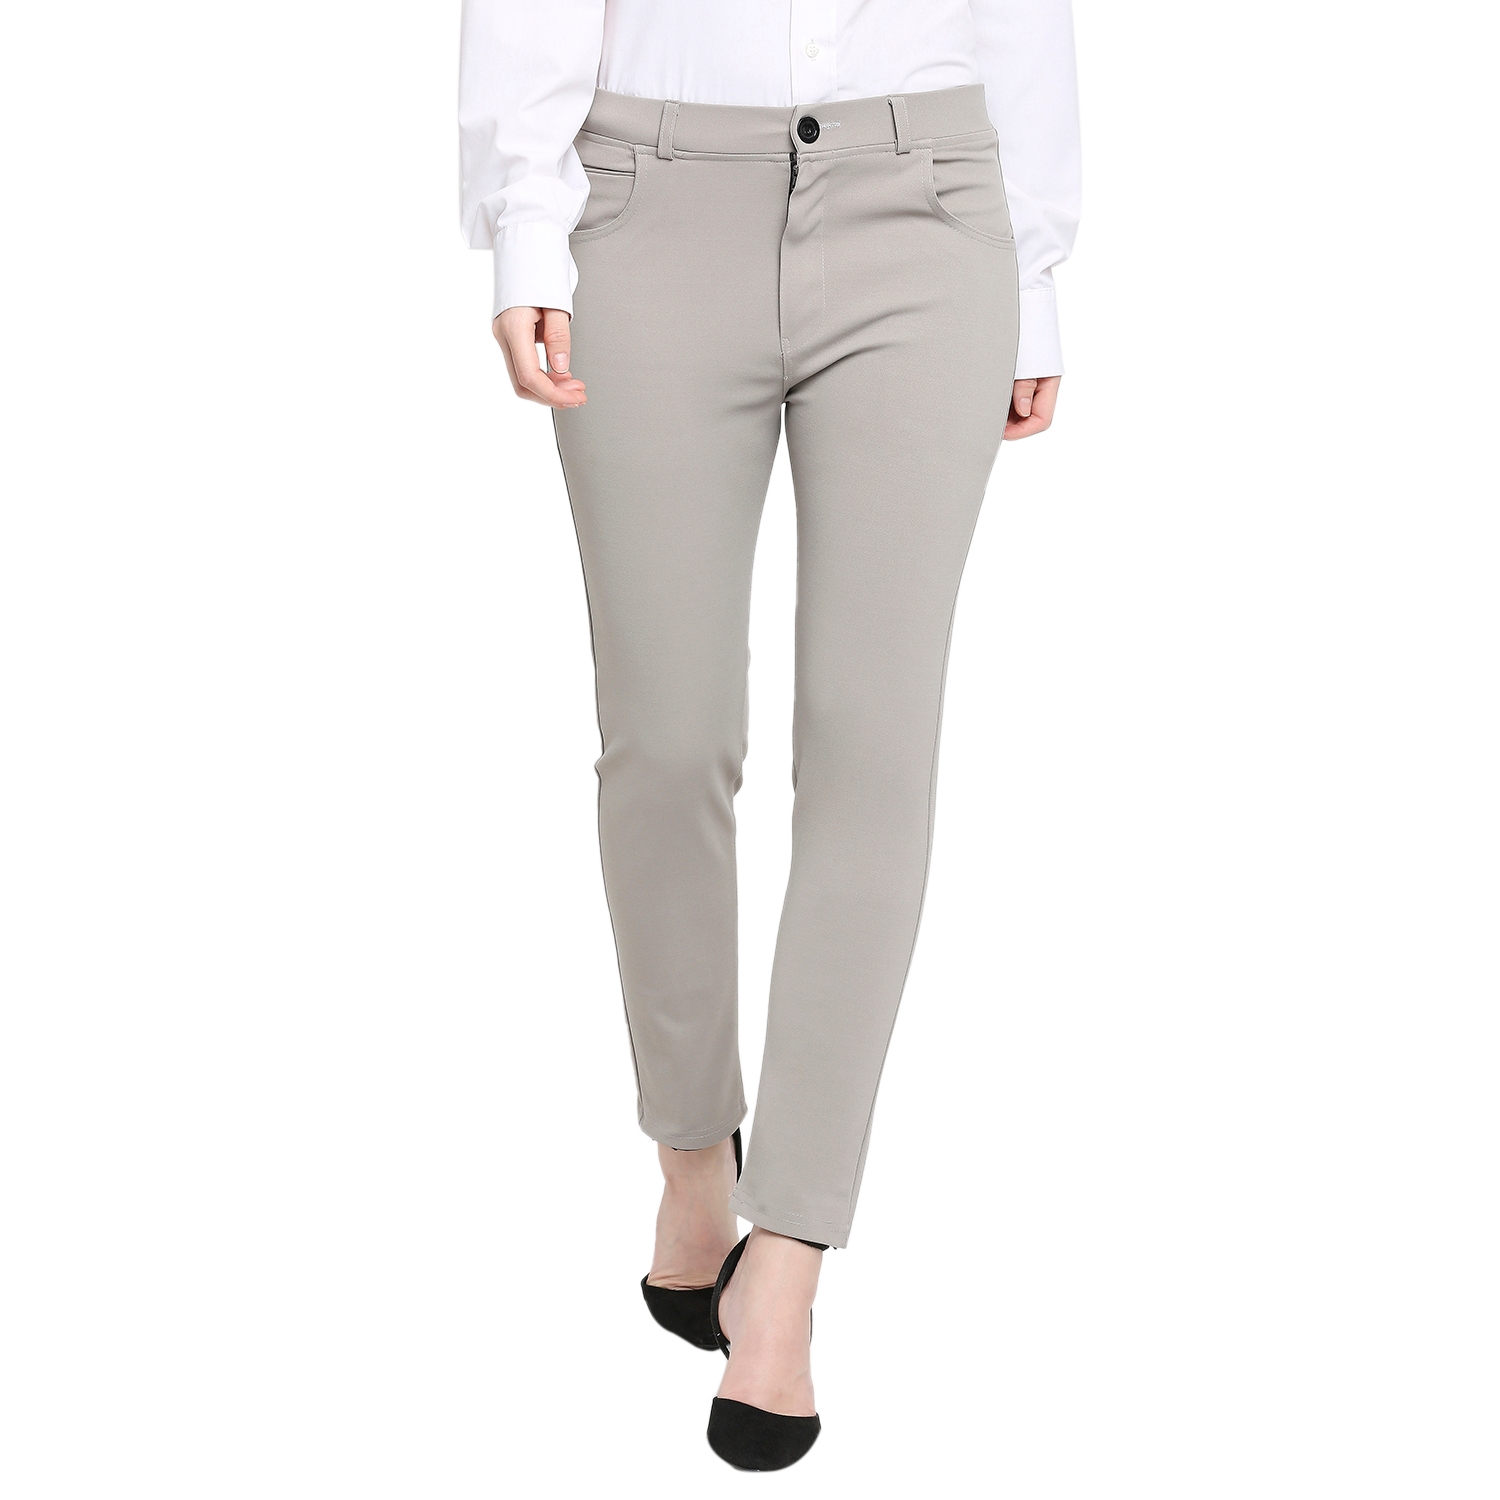 Buy TIM ROBBINS MENS TROUSERS LIGHT GREY COLOR SLIM FIT COTTON BLEND  FORMAL TROUSERSTROUSERMEN TROUSERFORMAL TROUSERPANTPANTSMEN PANTS TROUSERSCASUAL TROUSERS Online at Best Prices in India  JioMart